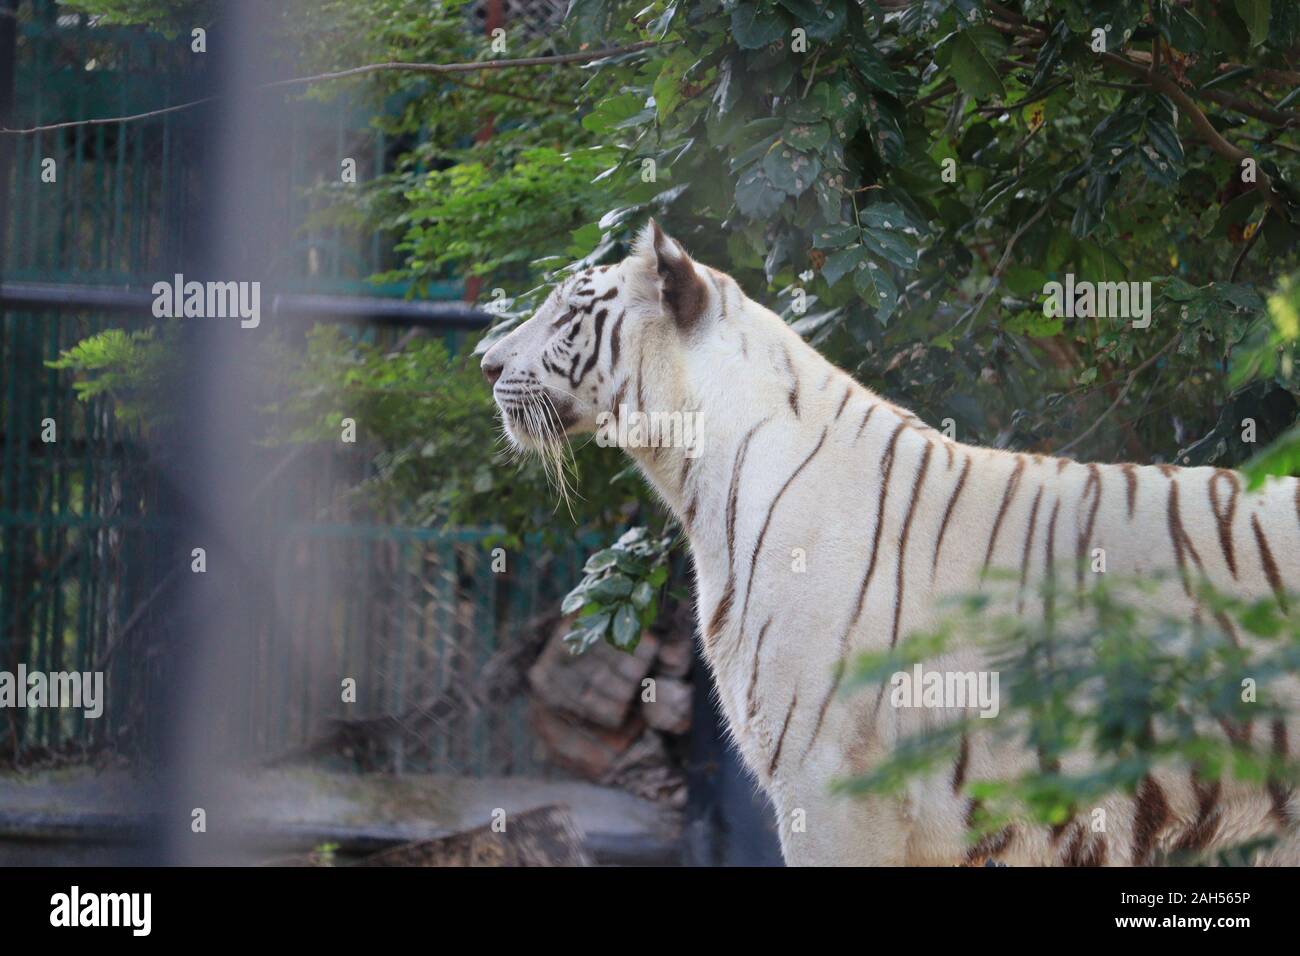 white tiger standing position